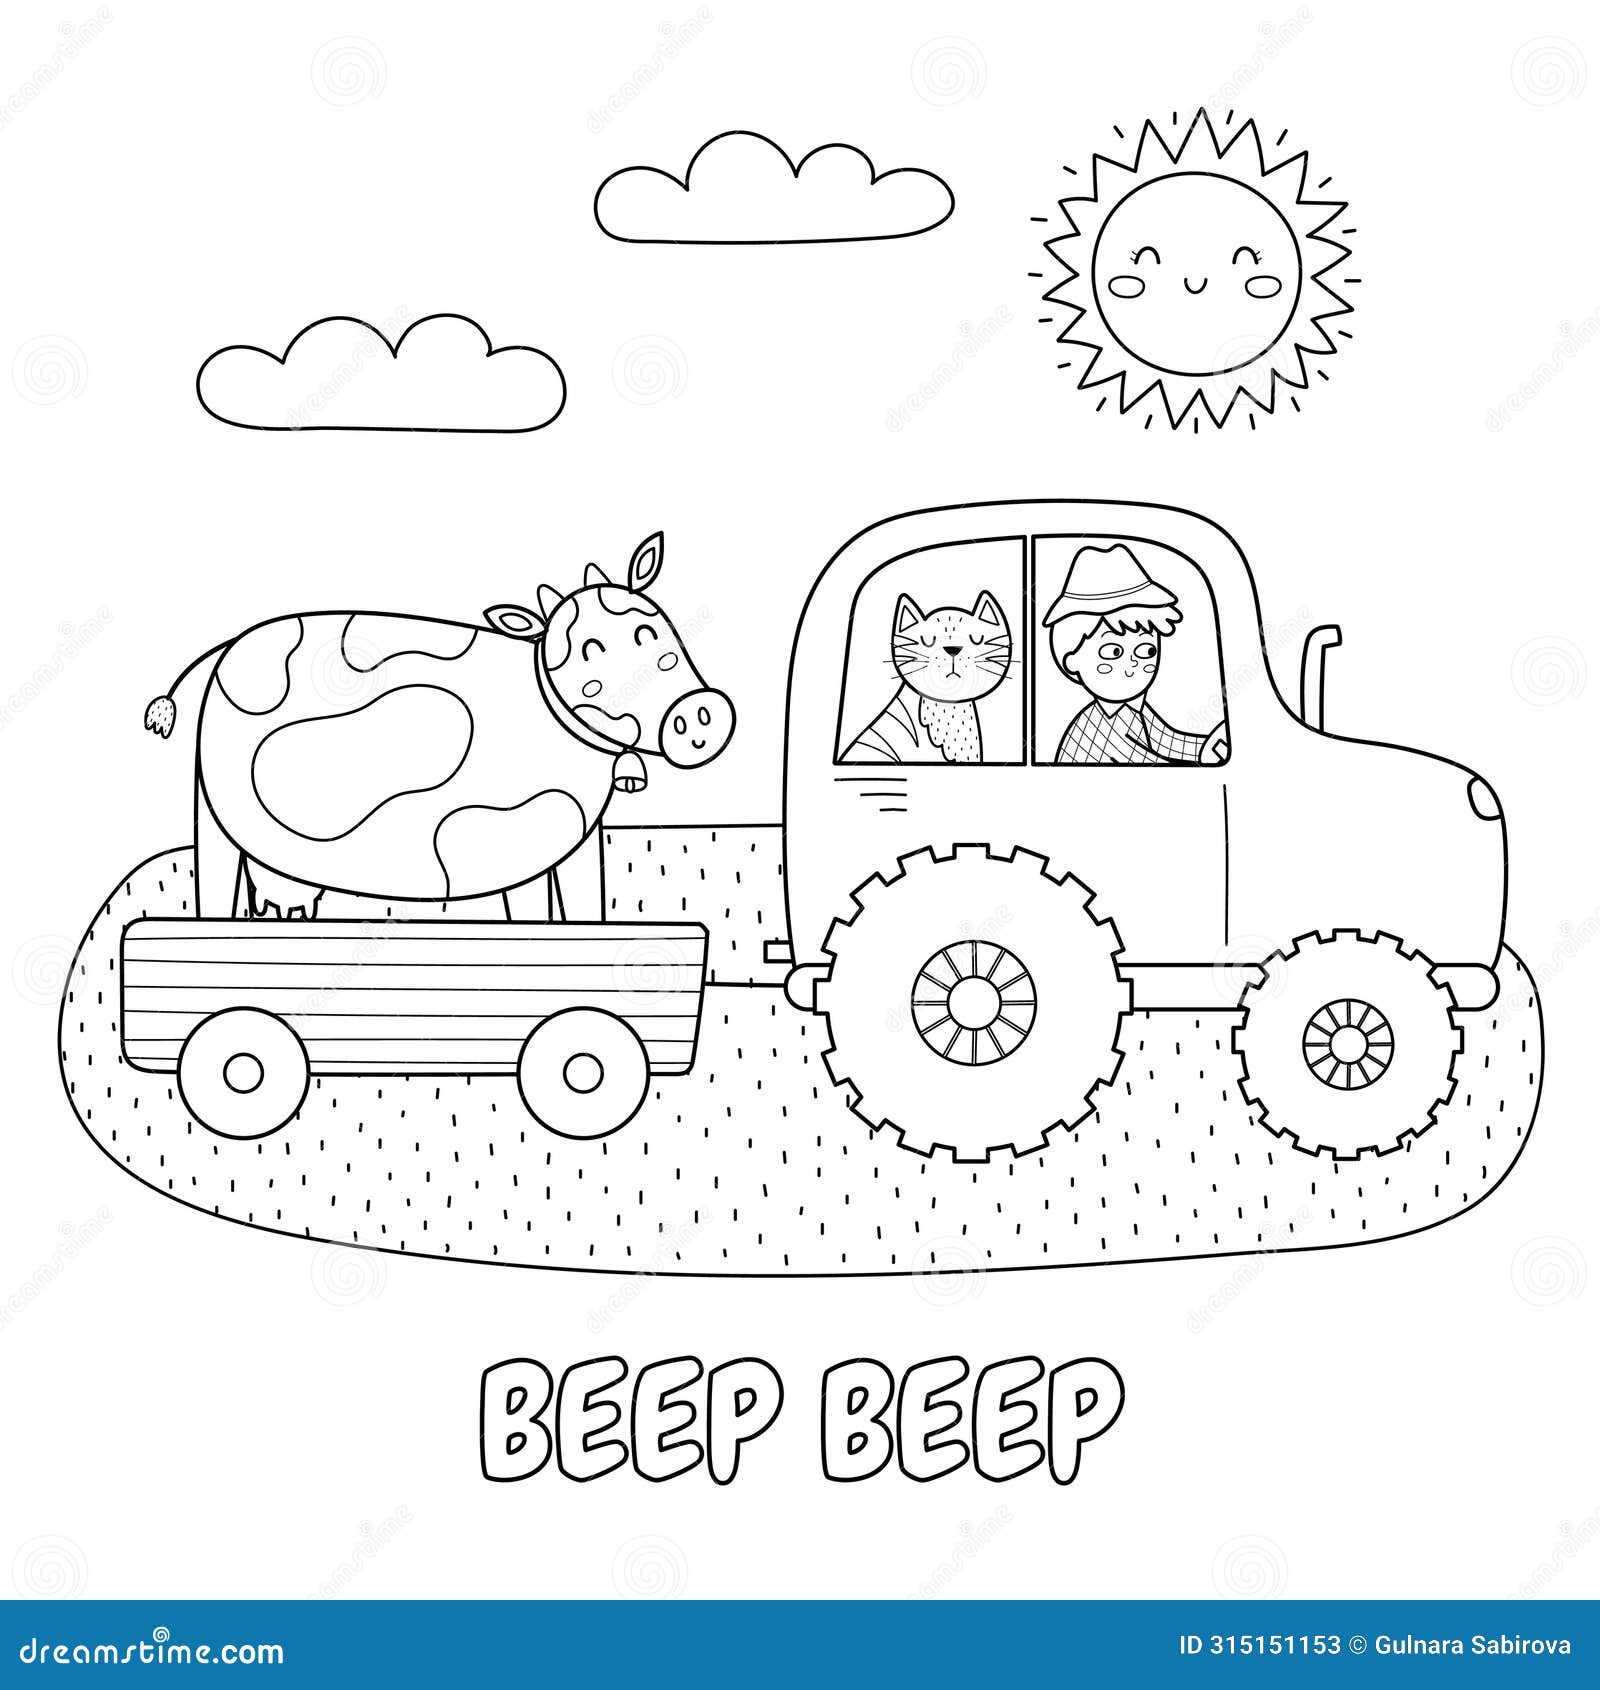 beep beep black and white print with cute boy and cat on a tractor carrying a cow